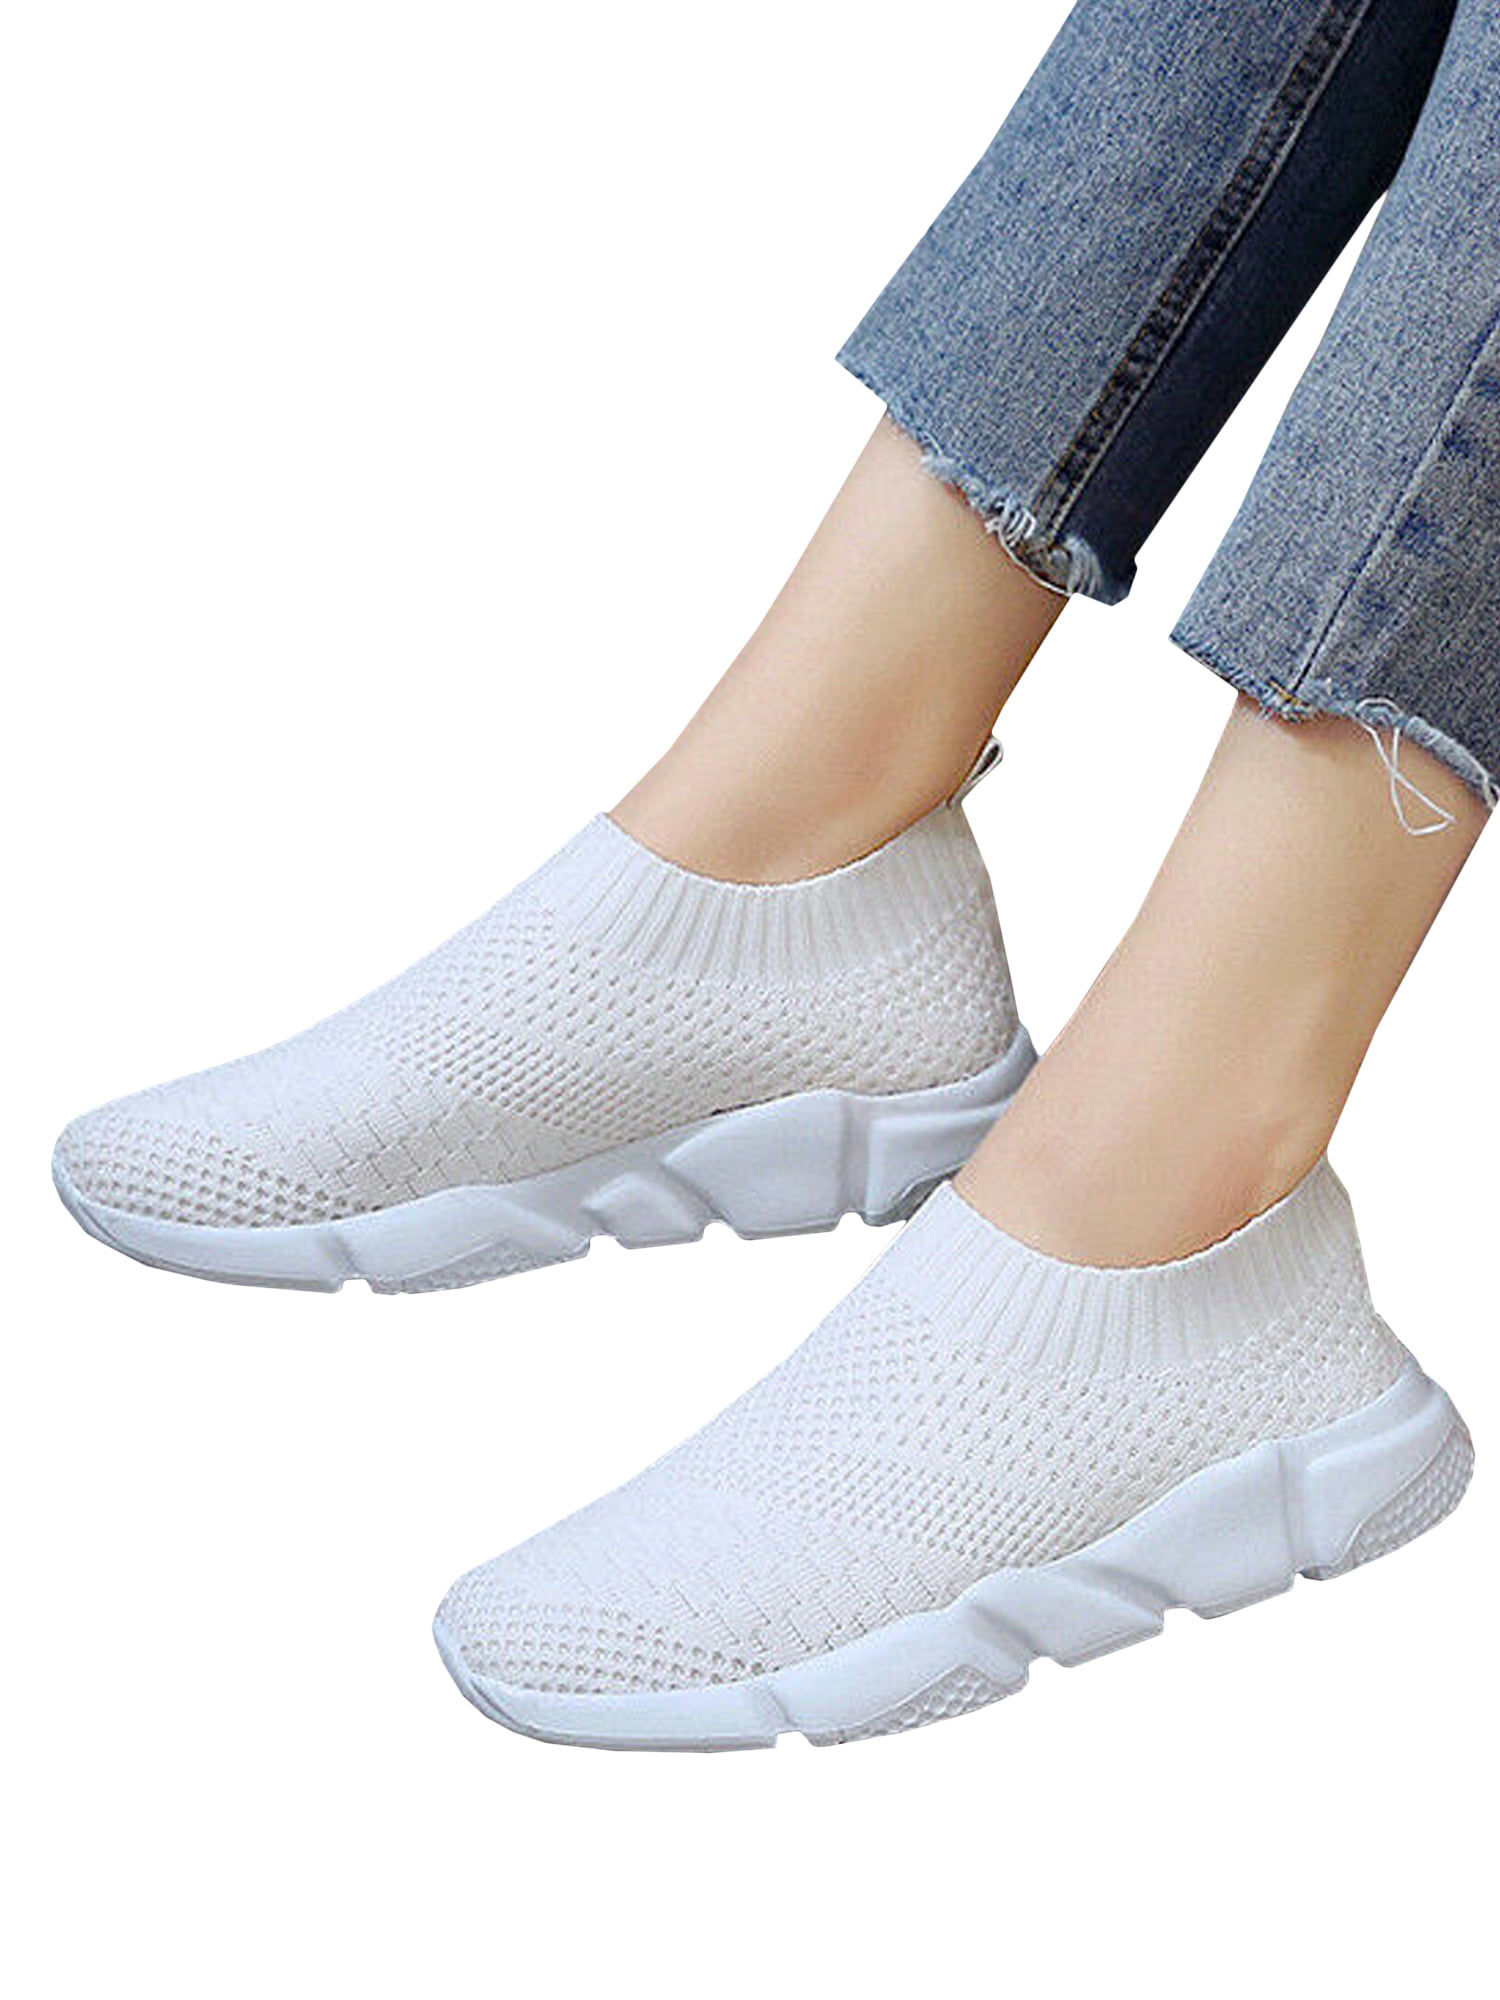 WOMENS SOCK KNIT TRAINERS LADIES LIGHTWEIGHT SPORTS COMFY SHOES RUNNING SNEAKERS 